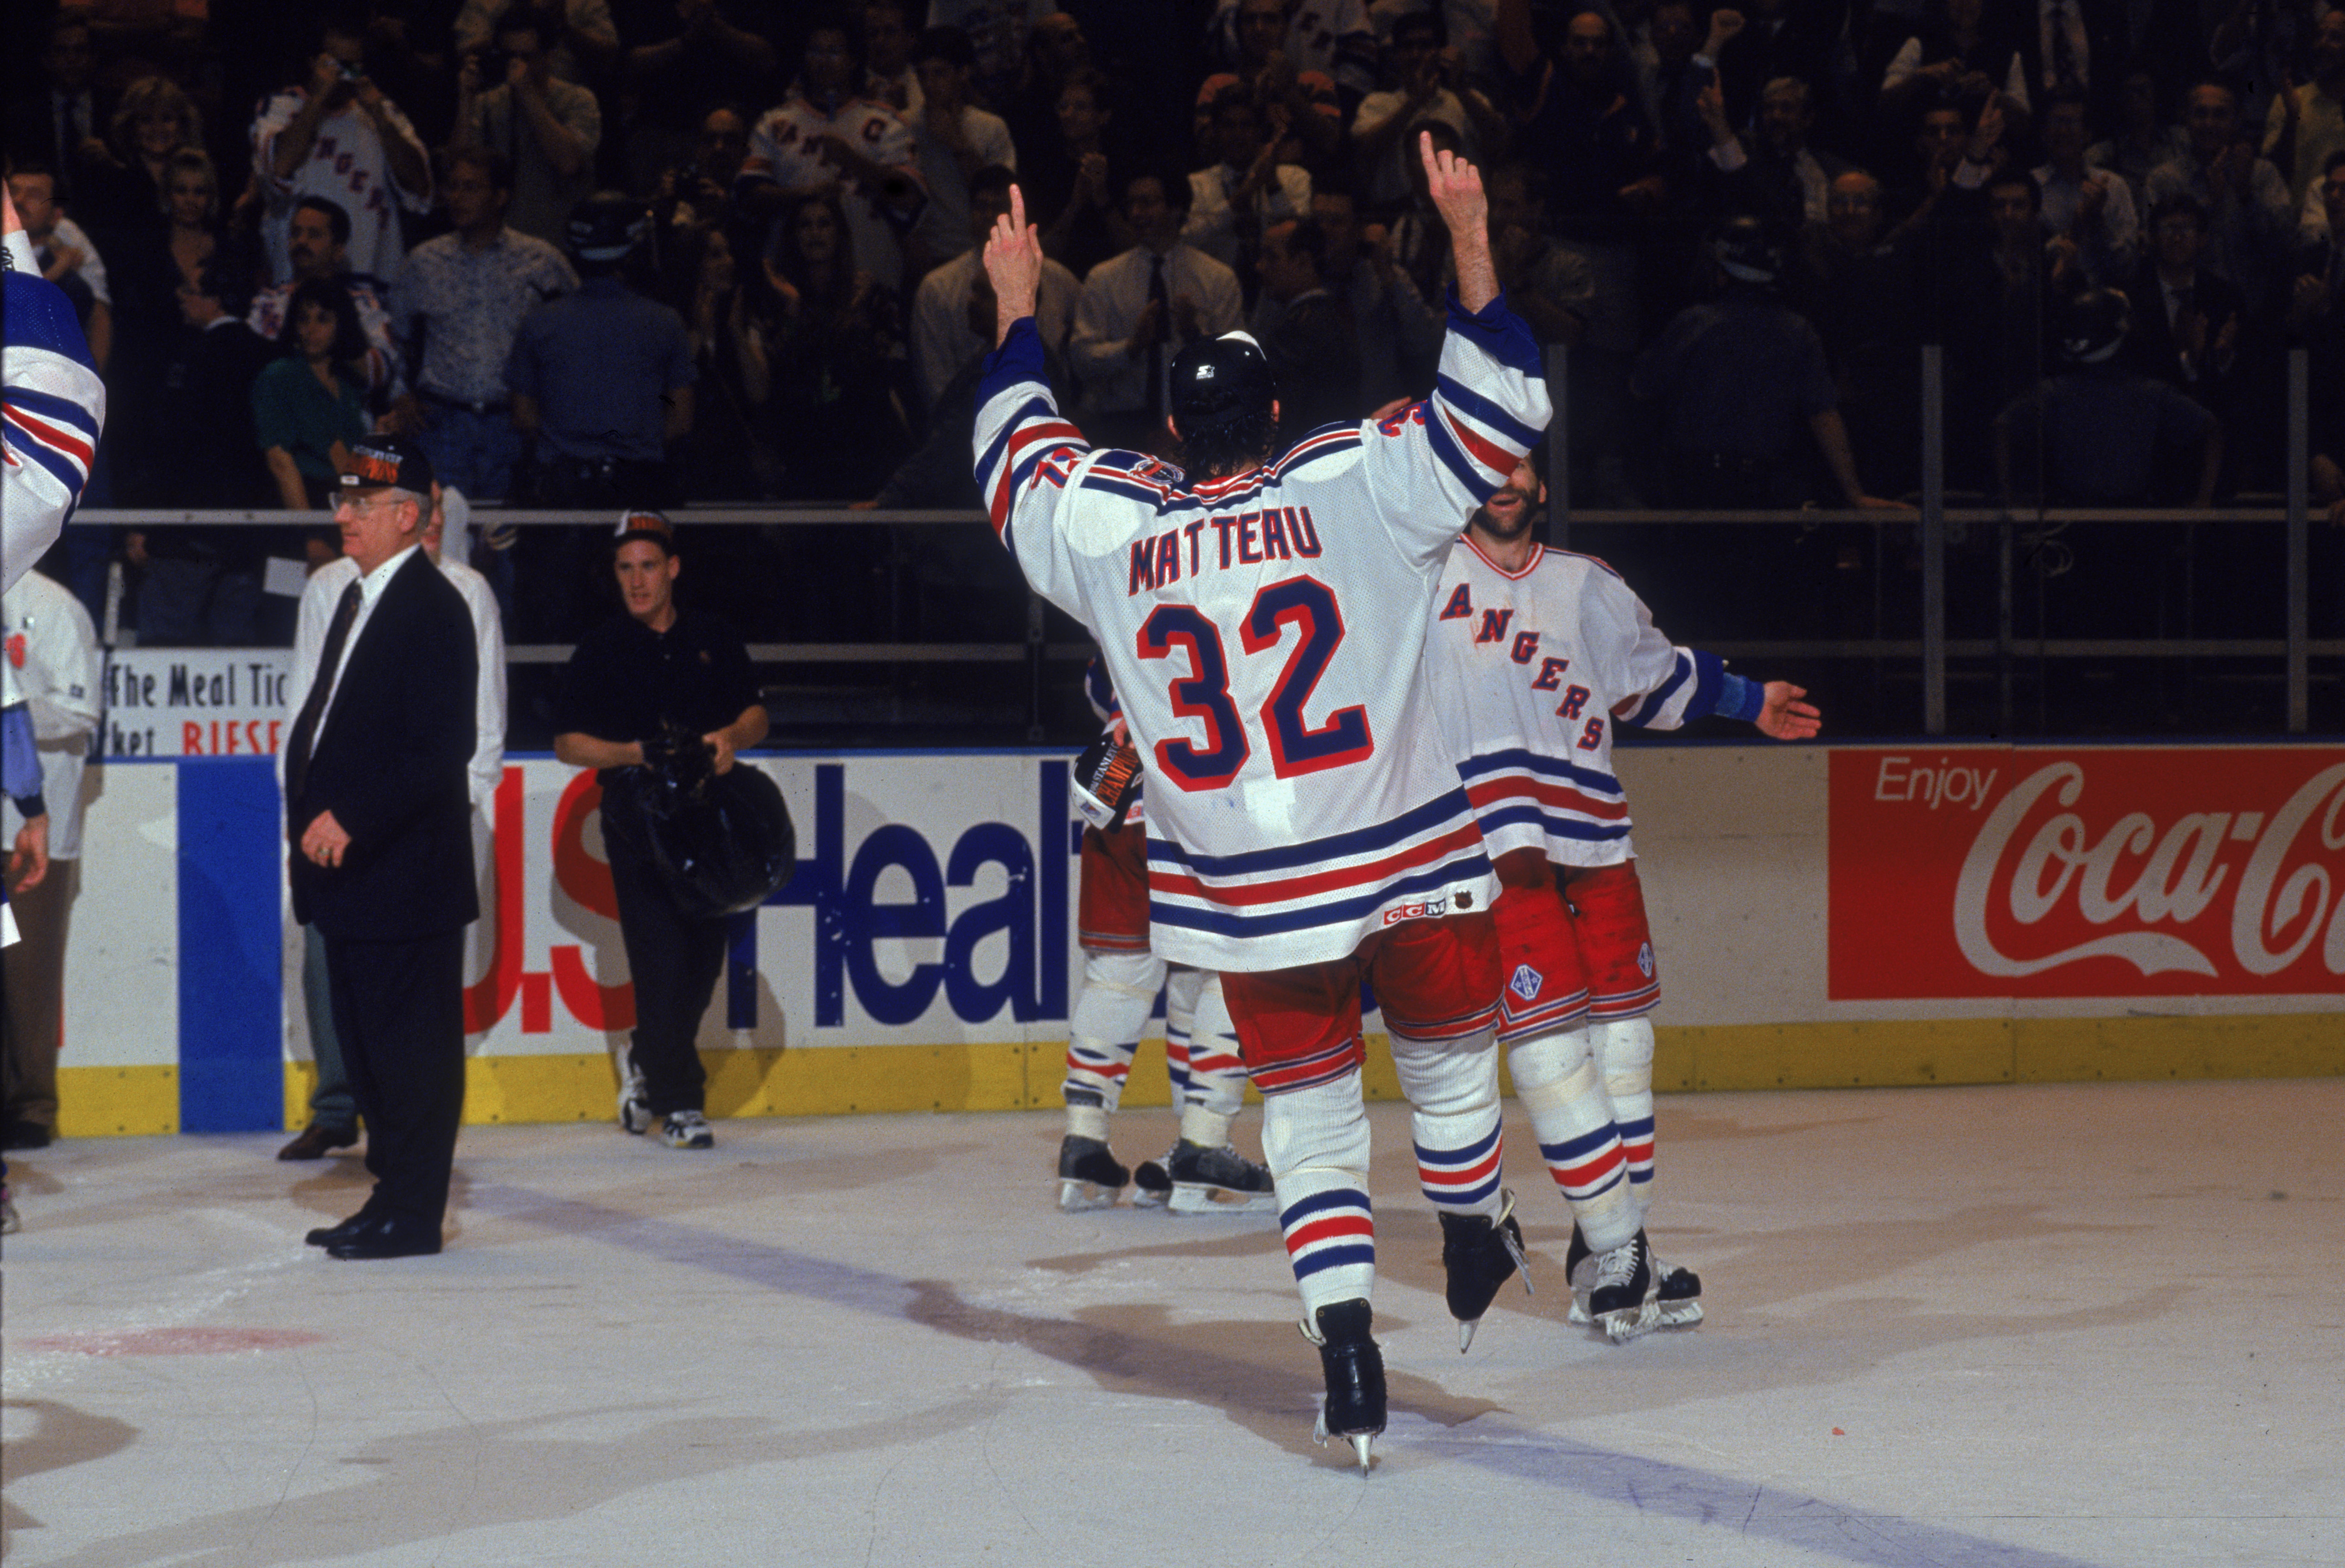 Canadian professional ice hockey player Stephane Matteau #32 of the New York Rangers skates on the ice in celebration toward bearded teammate Glenn Anderson after winning the Stanley Cup Championship, Madison Square Garden, New York, June 14, 1994. Stephane Matteau played for the New York Rangers from 1993 to 1996. (Photo by Bruce Bennett Studios/Getty Images)